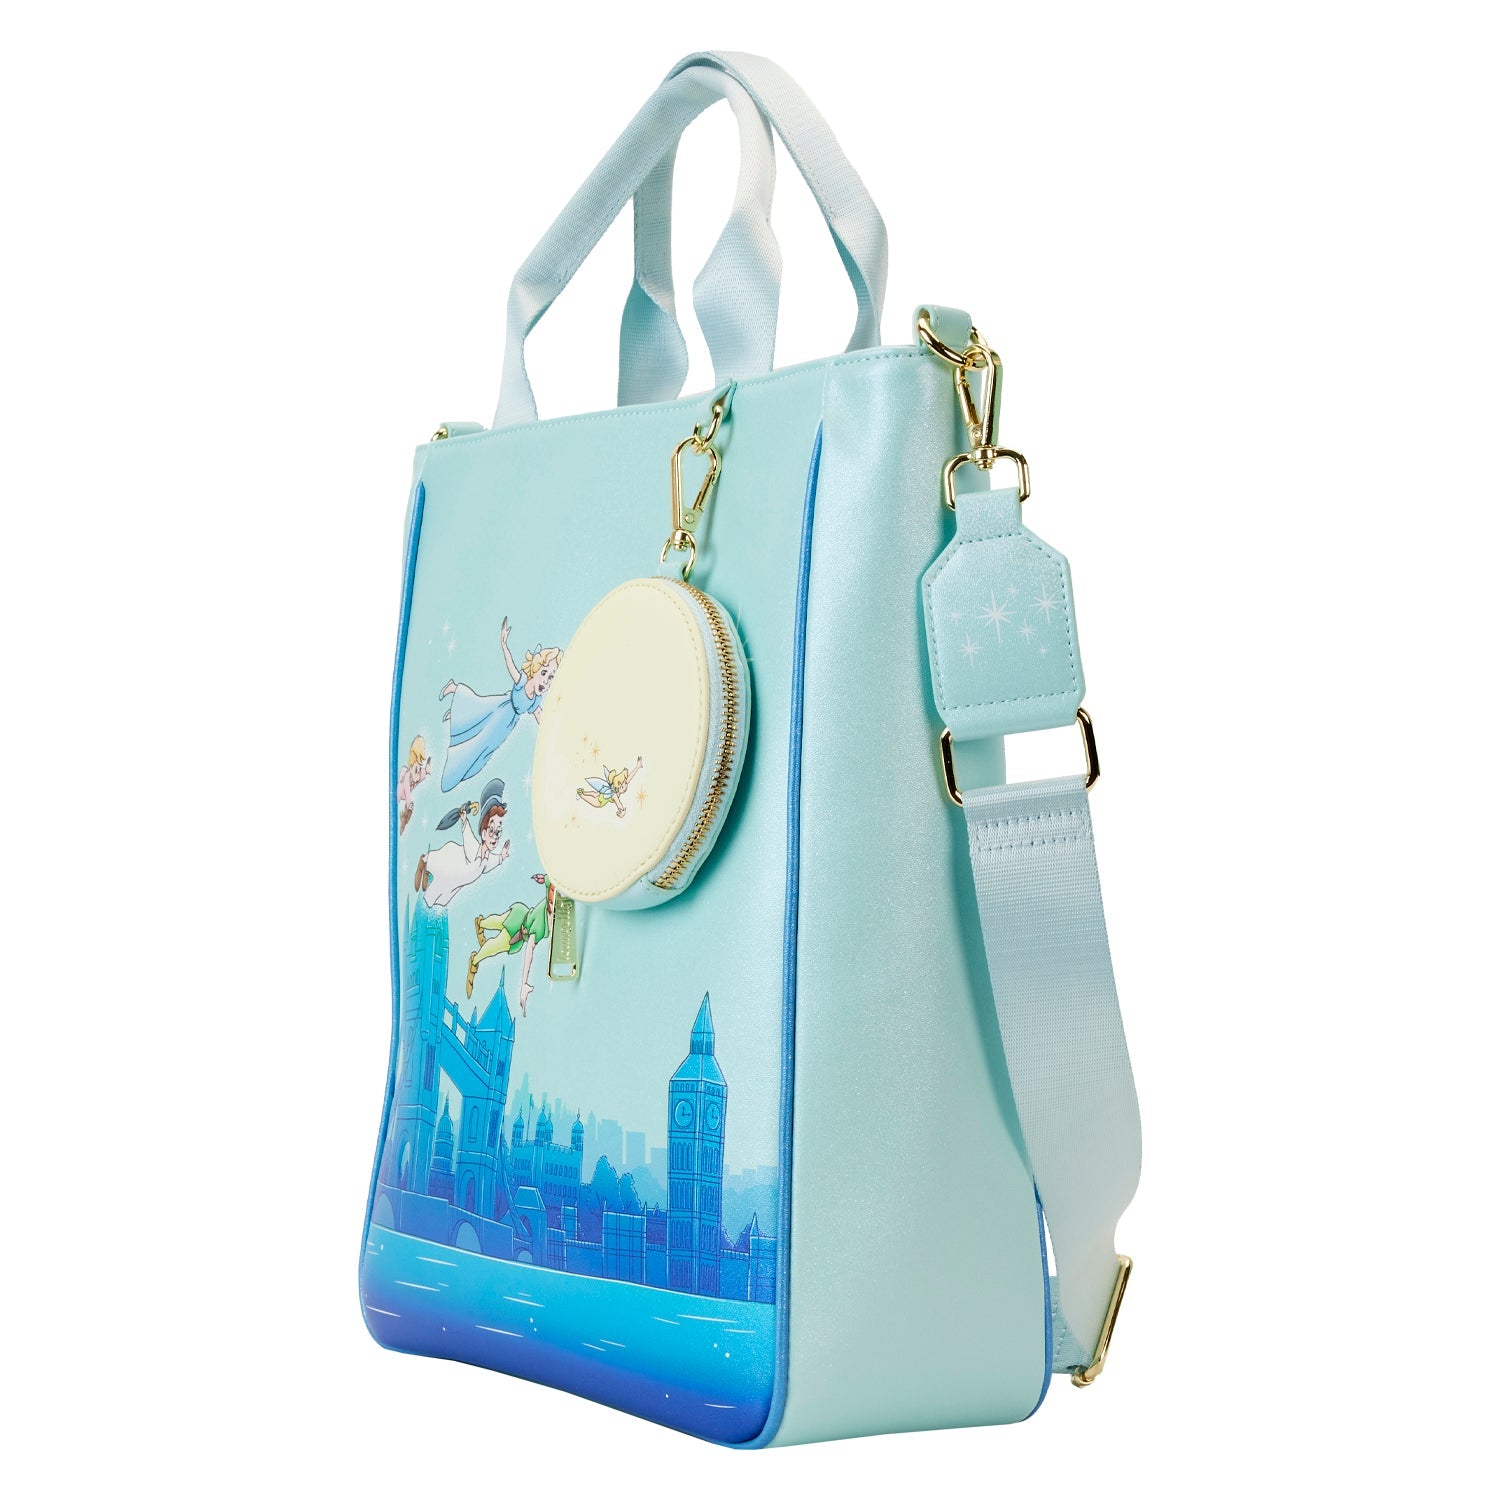 Loungefly x Disney Peter Pan You Can Fly Tote Bag - GeekCore